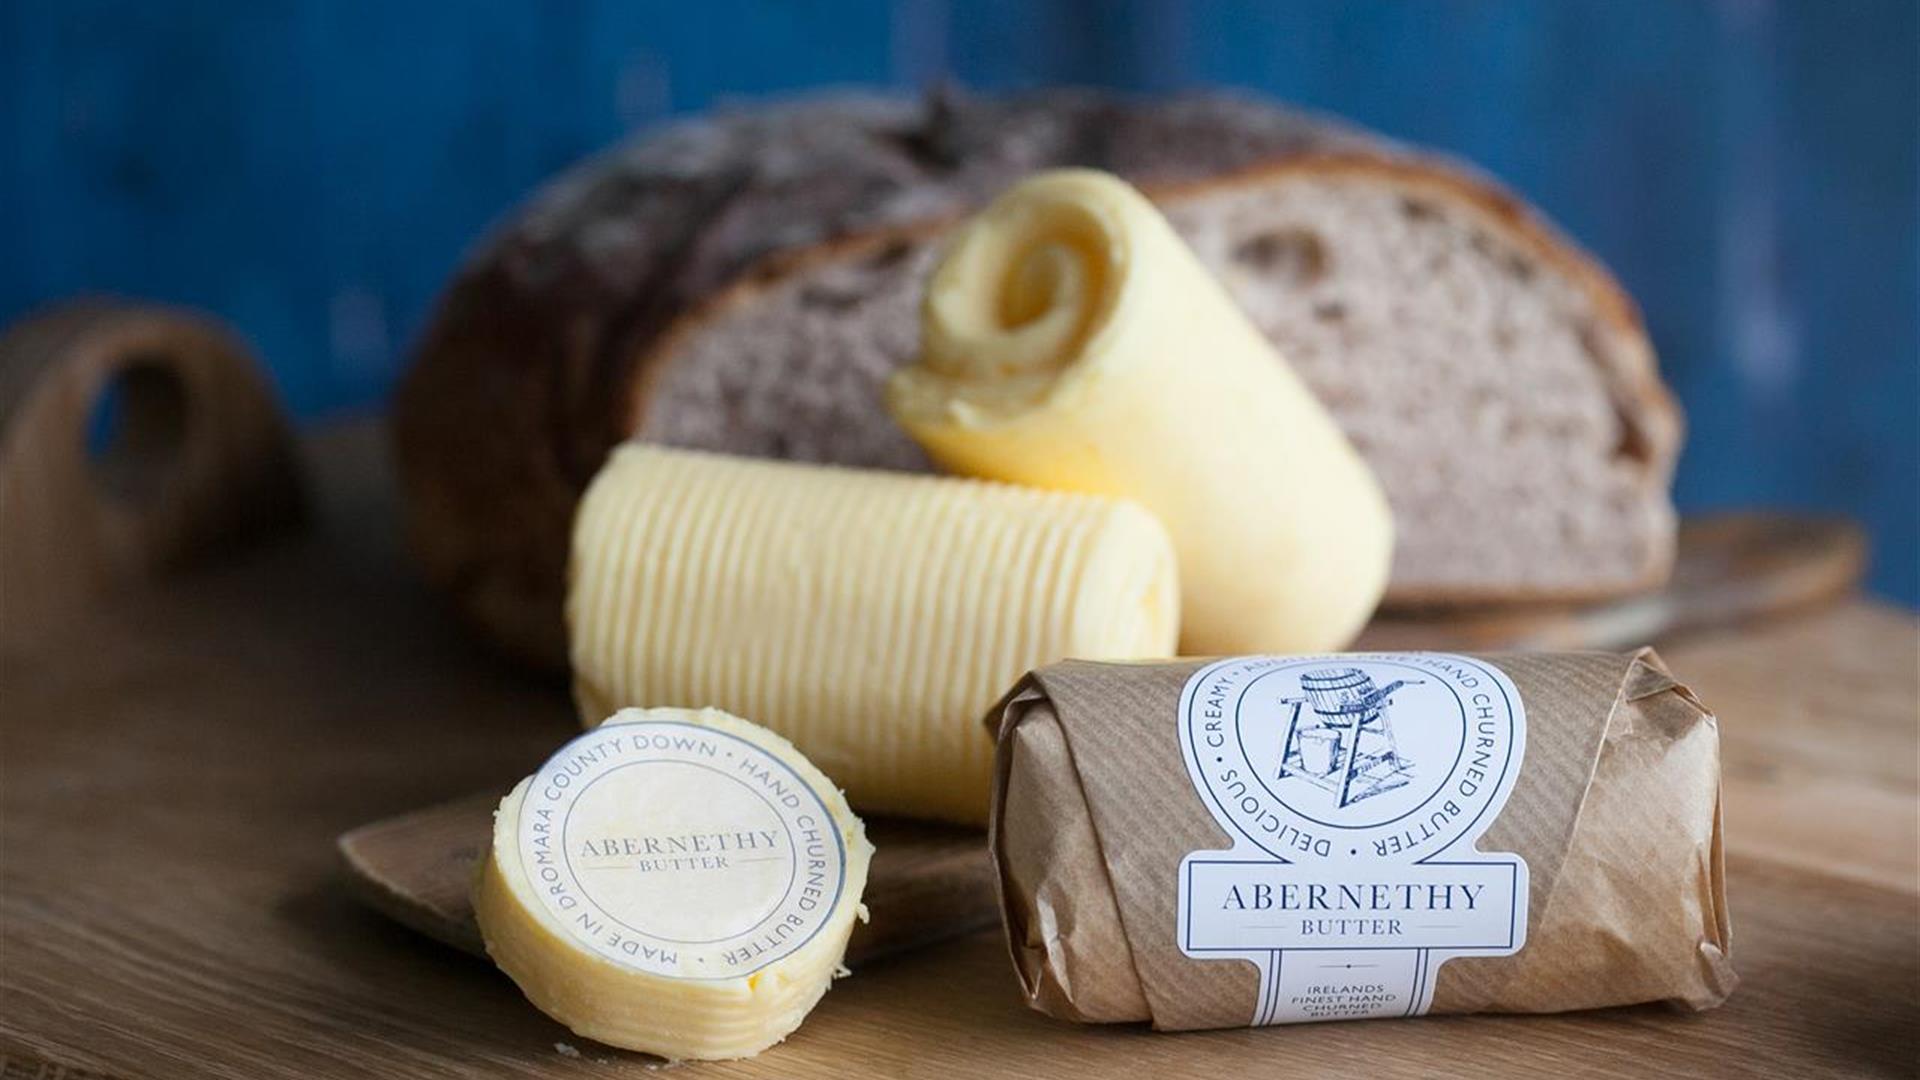 Image shows small rolls of butter with Abernethy packaging